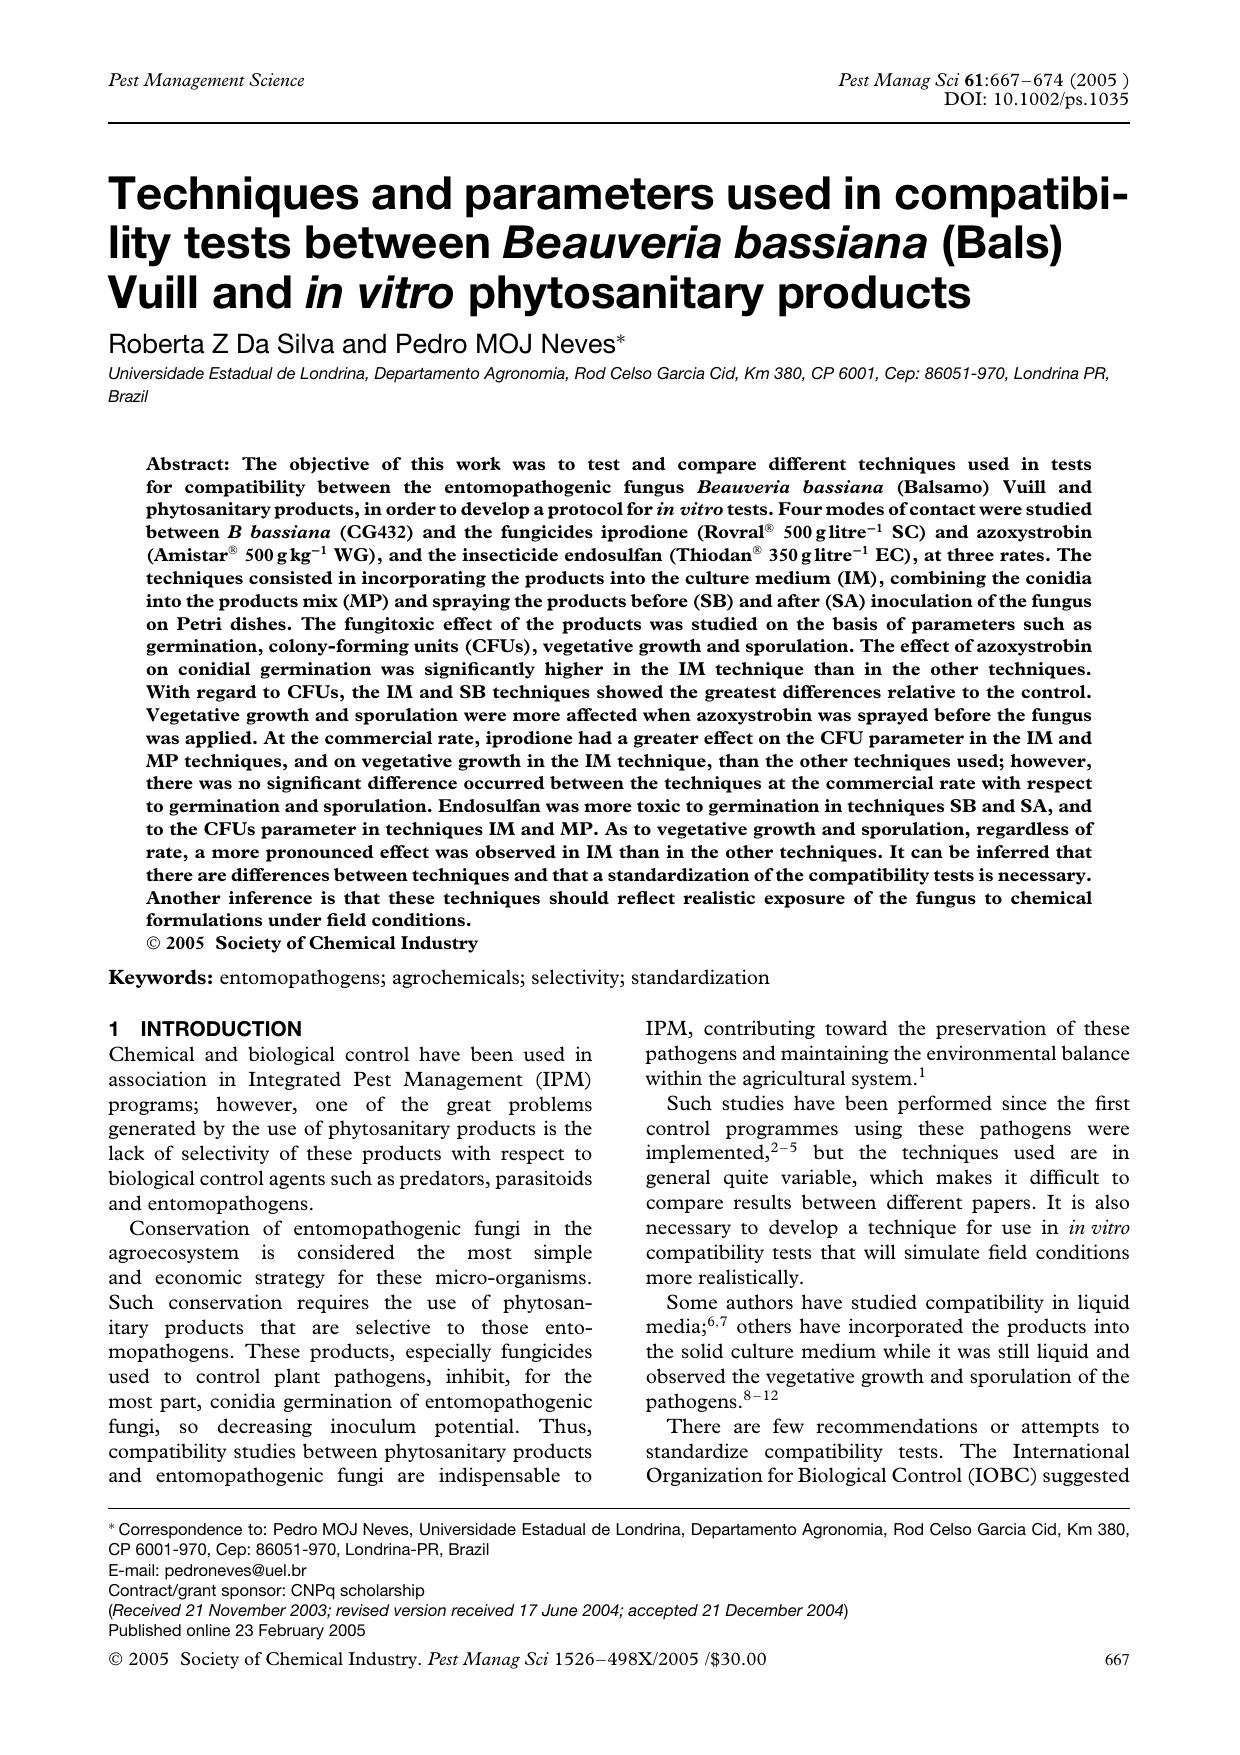 Techniques and parameters used in compatibility tests between Beauveria bassiana (Bals) Vuill and in vitro phytosanitary products by Unknown